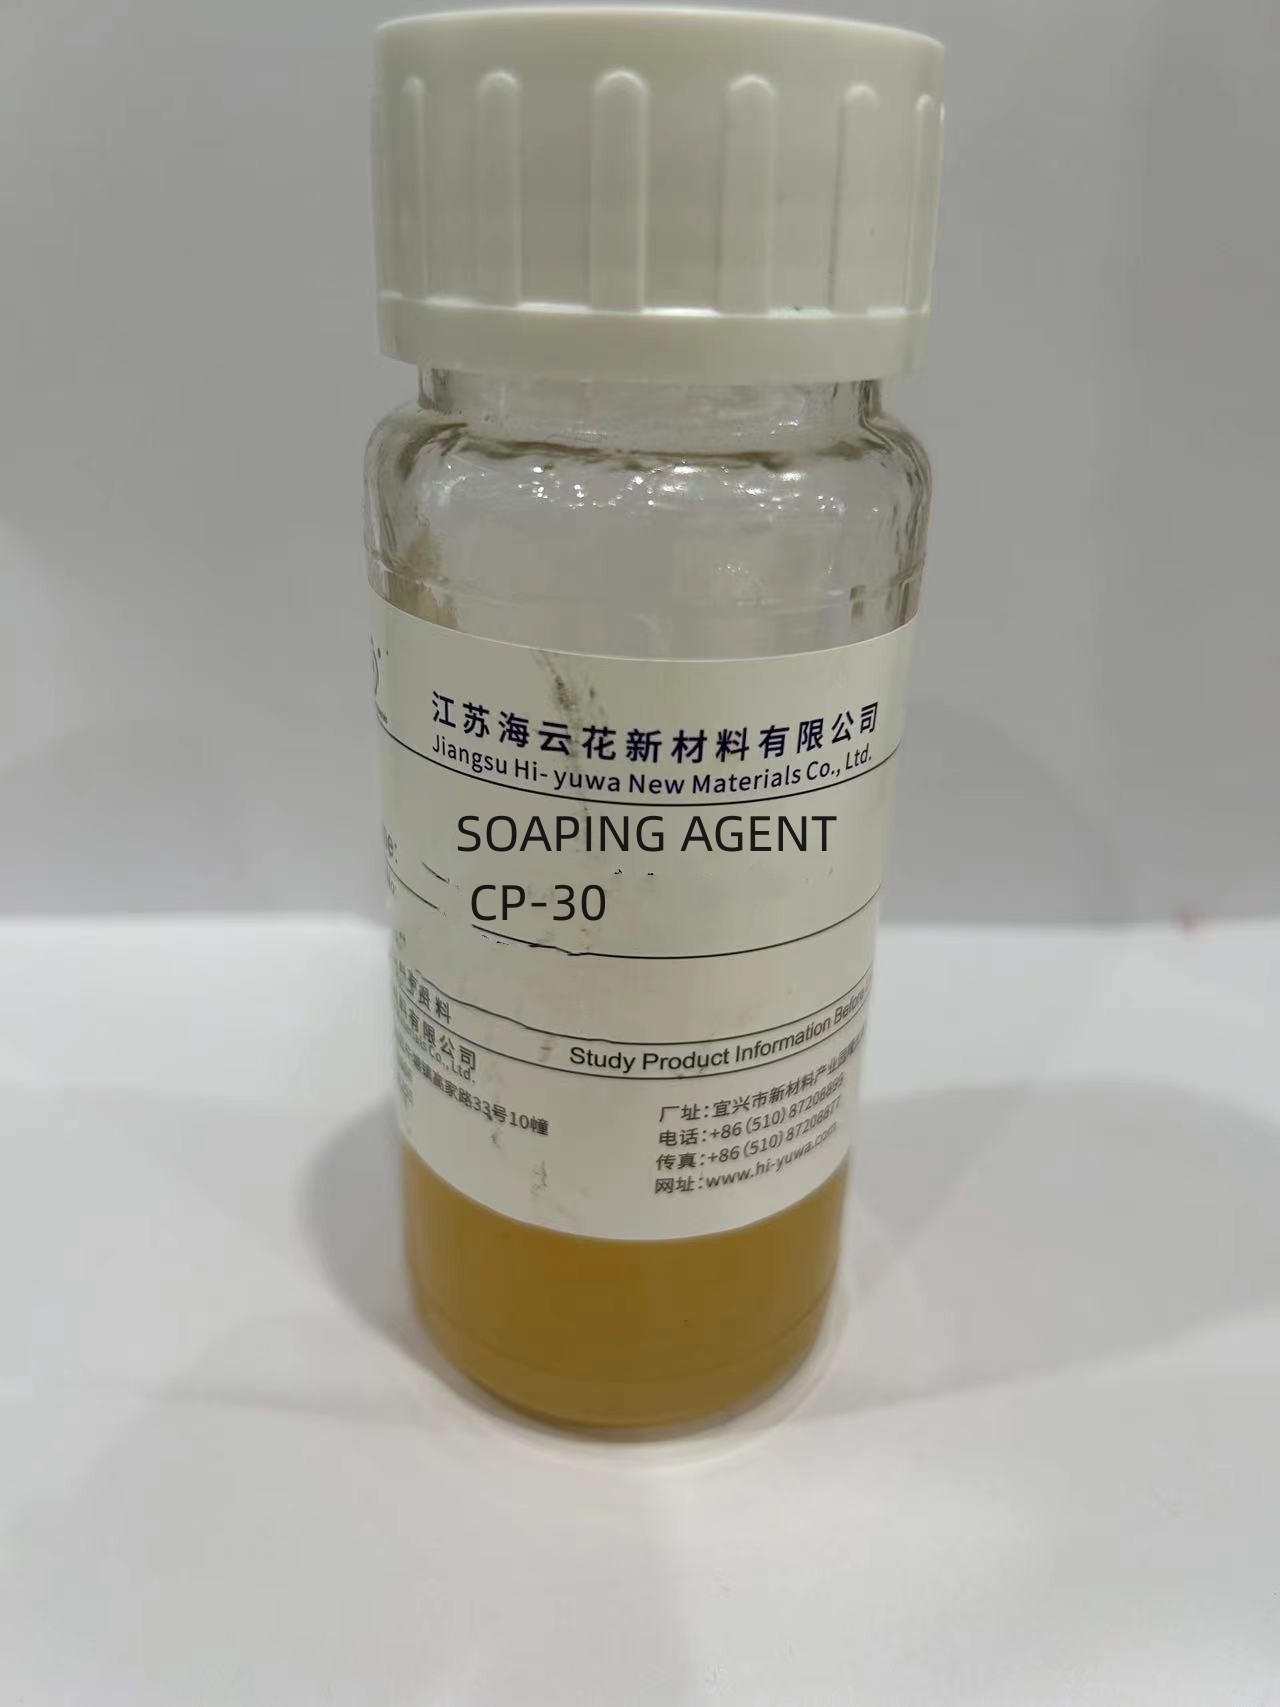 SOAPING AGENT CP-30